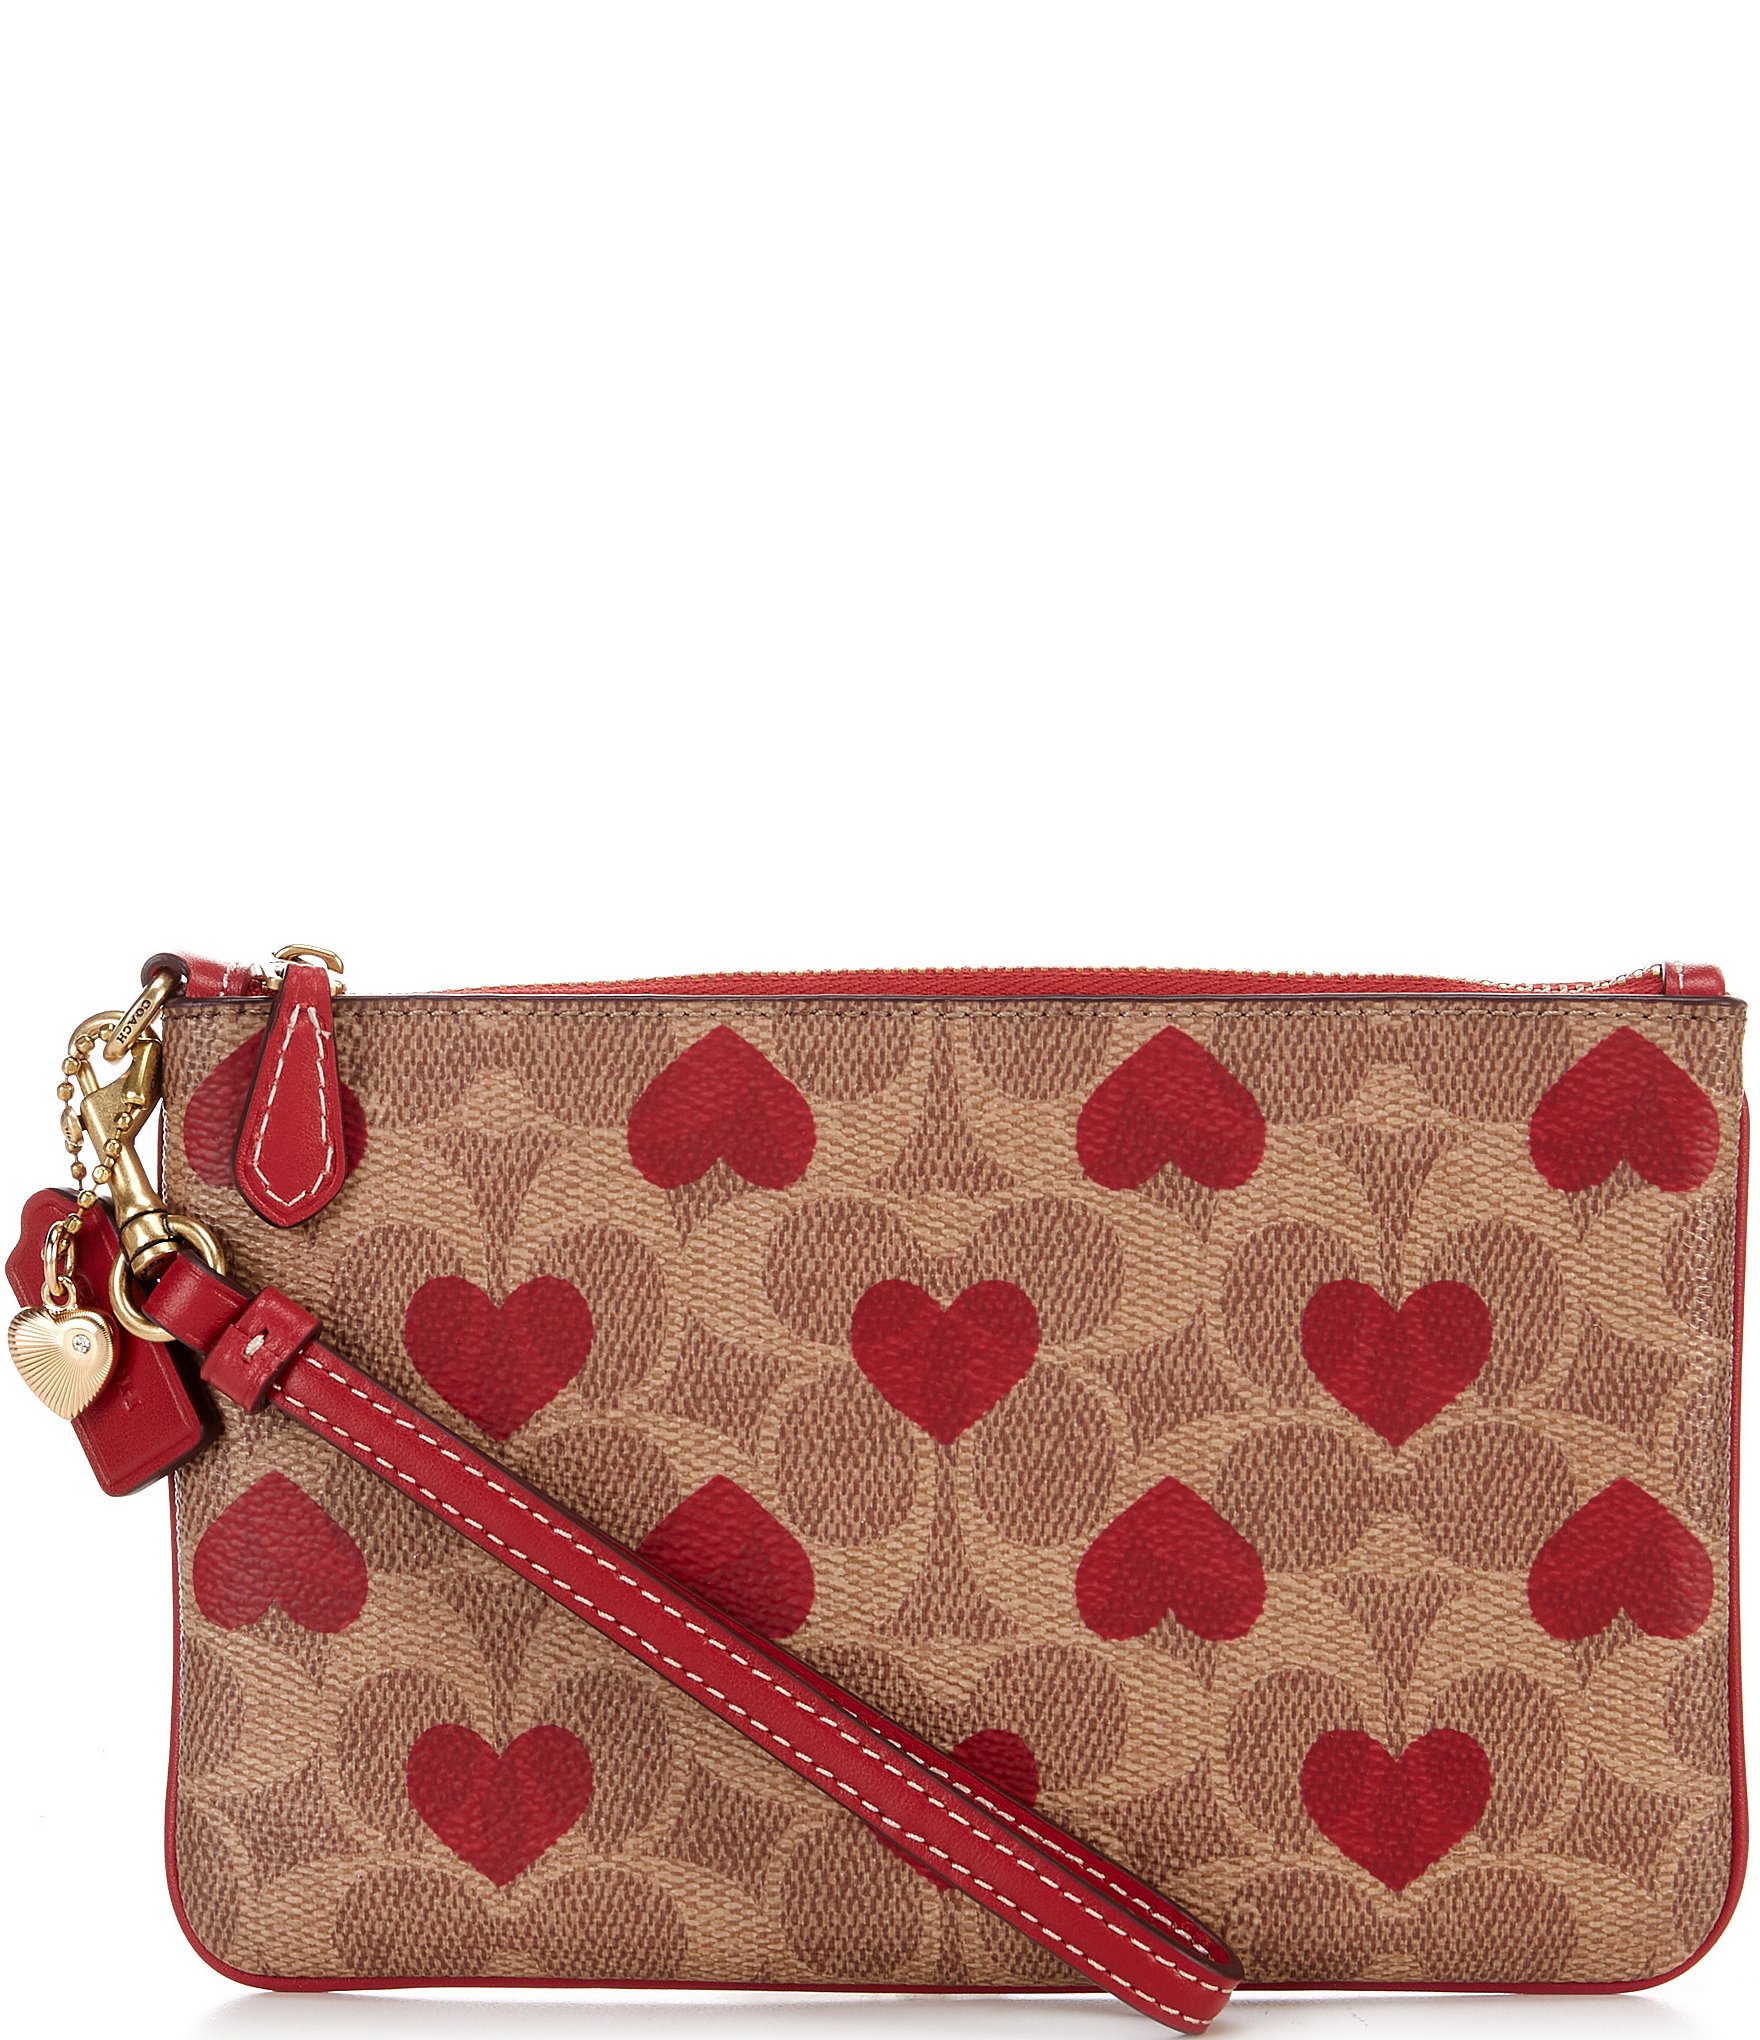 Coach Restored Heart Wristlet in Signature Canvas with Heart Print - Women's Wallets - Brass/Tan Red Apple